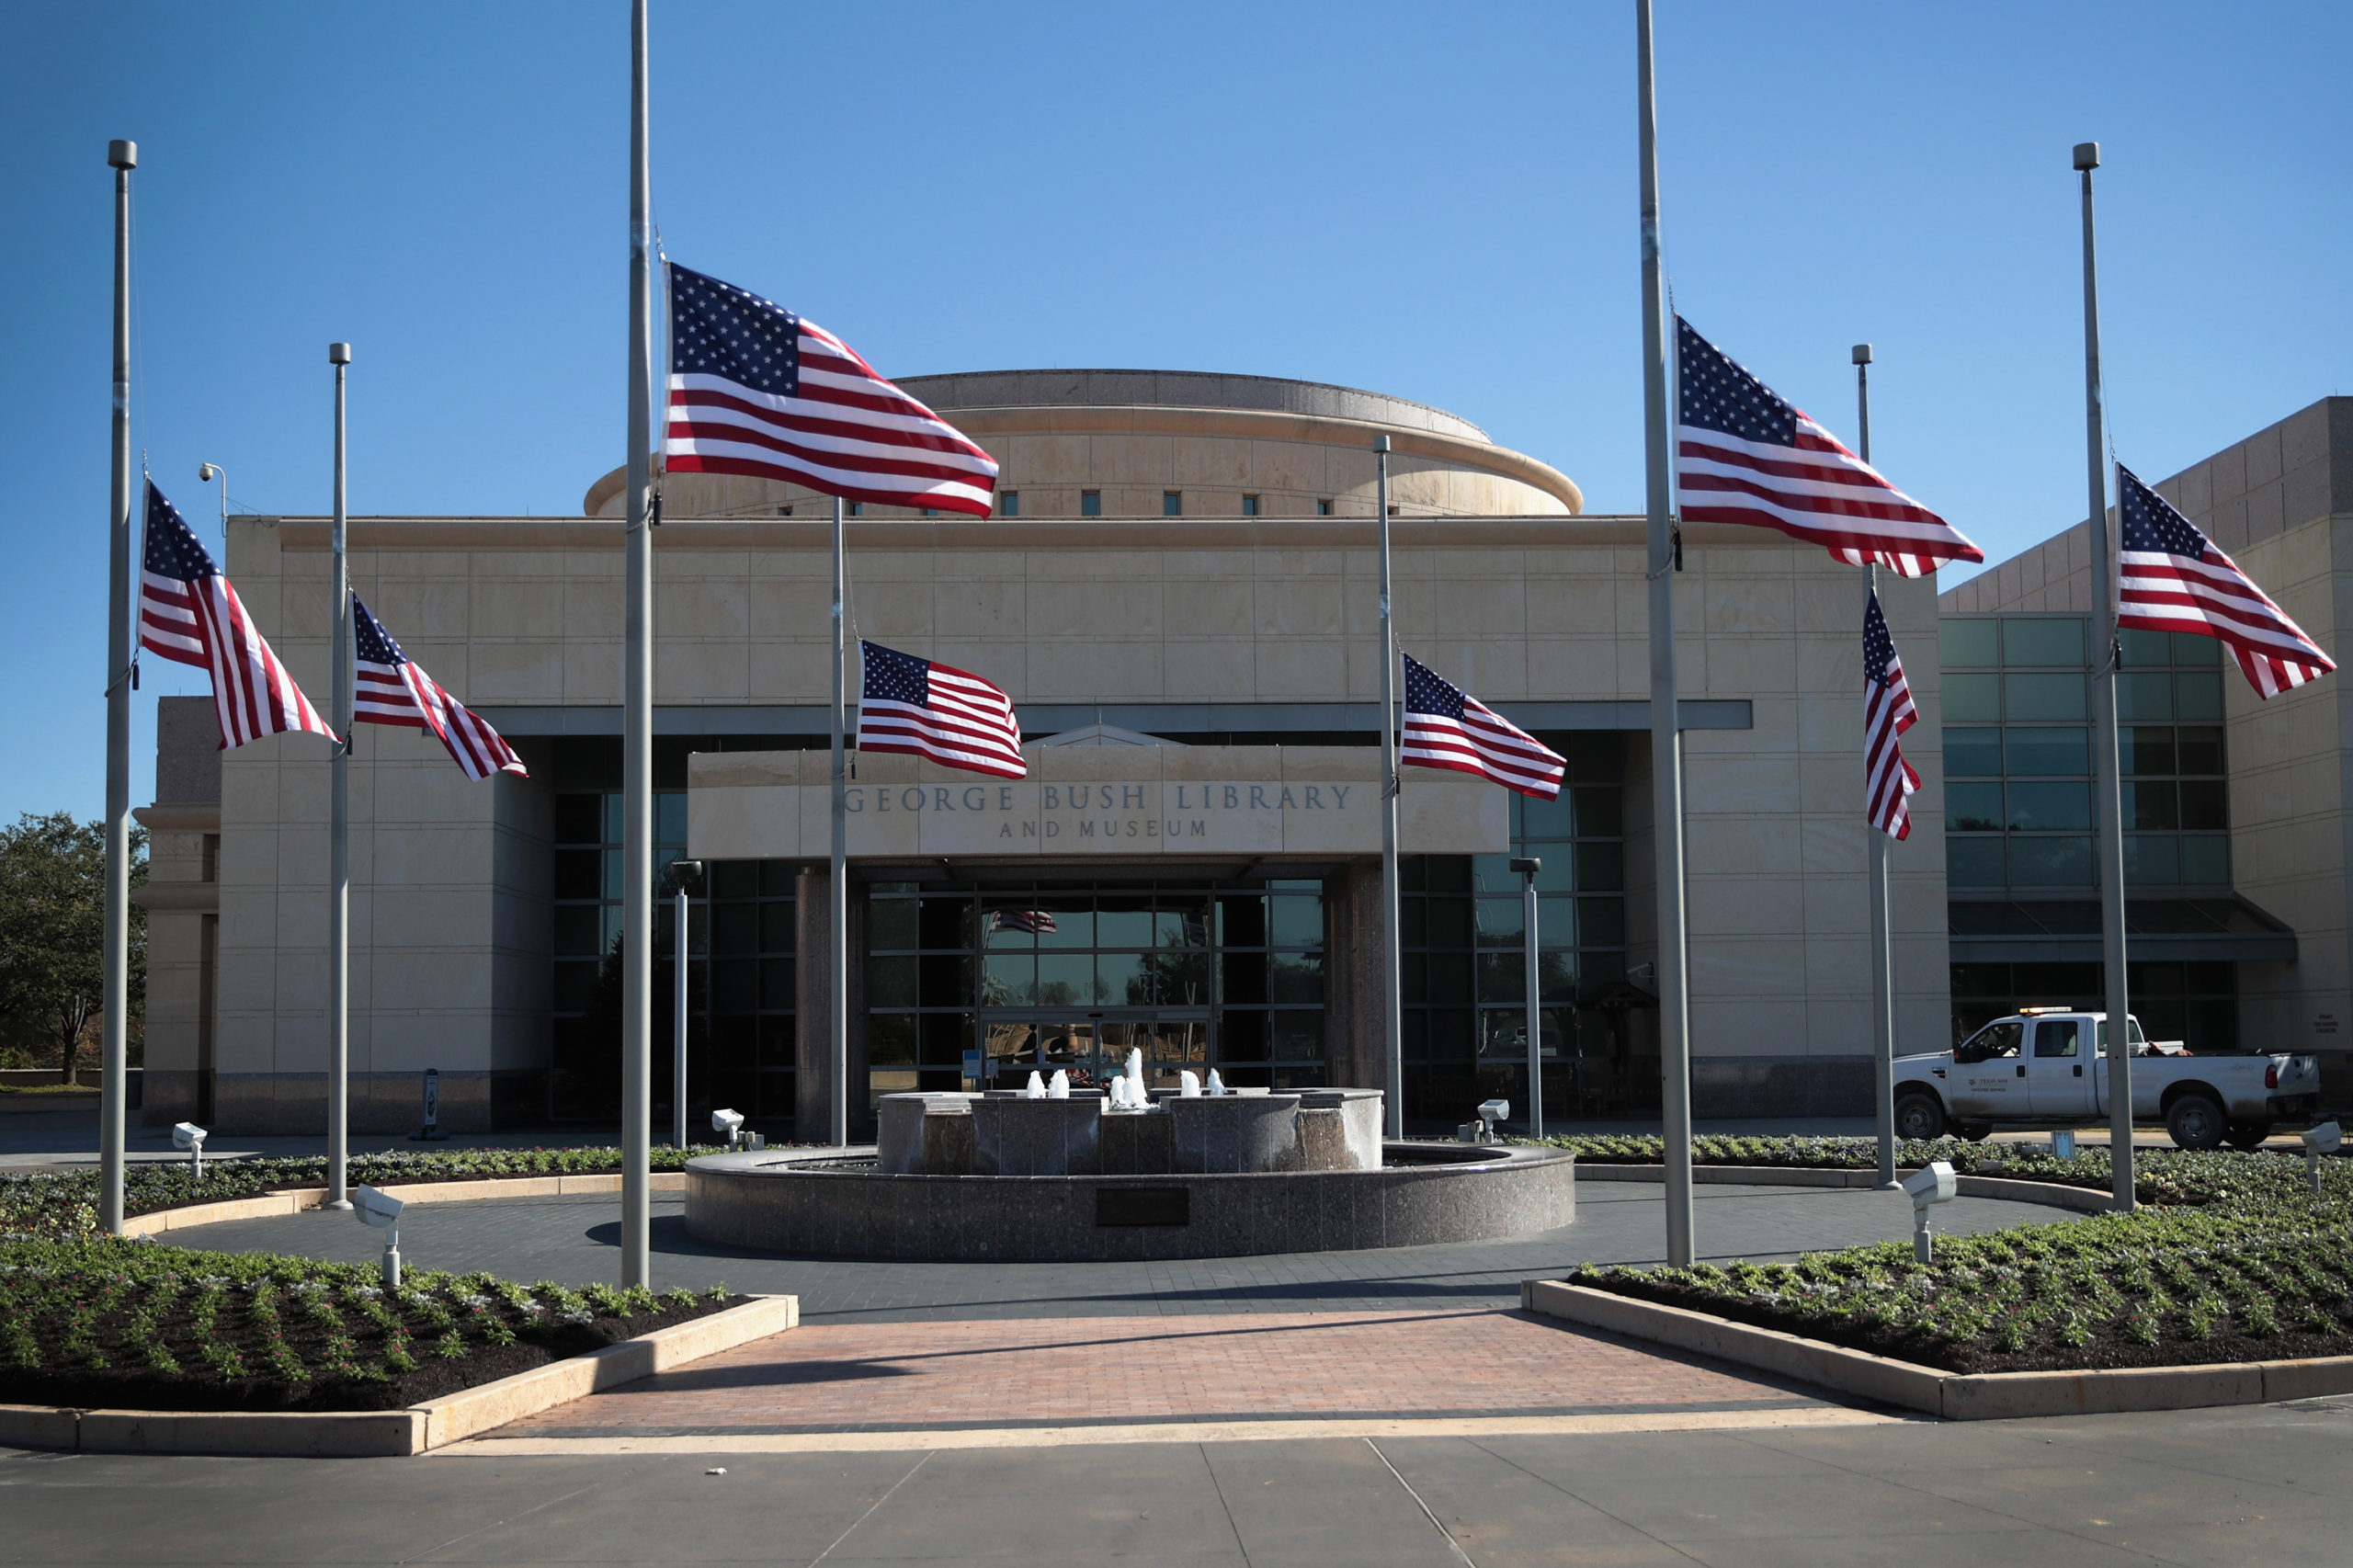 Flags fly at half-mast in front of the George H.W. Bush Presidential Library Center on the campus of Texas A&M University on December 2, 2018 in College Station, Texas. Bush, who died on November 30, will be buried next to his wife Barbara near the library on Thursday. (Photo by Scott Olson/Getty Images)